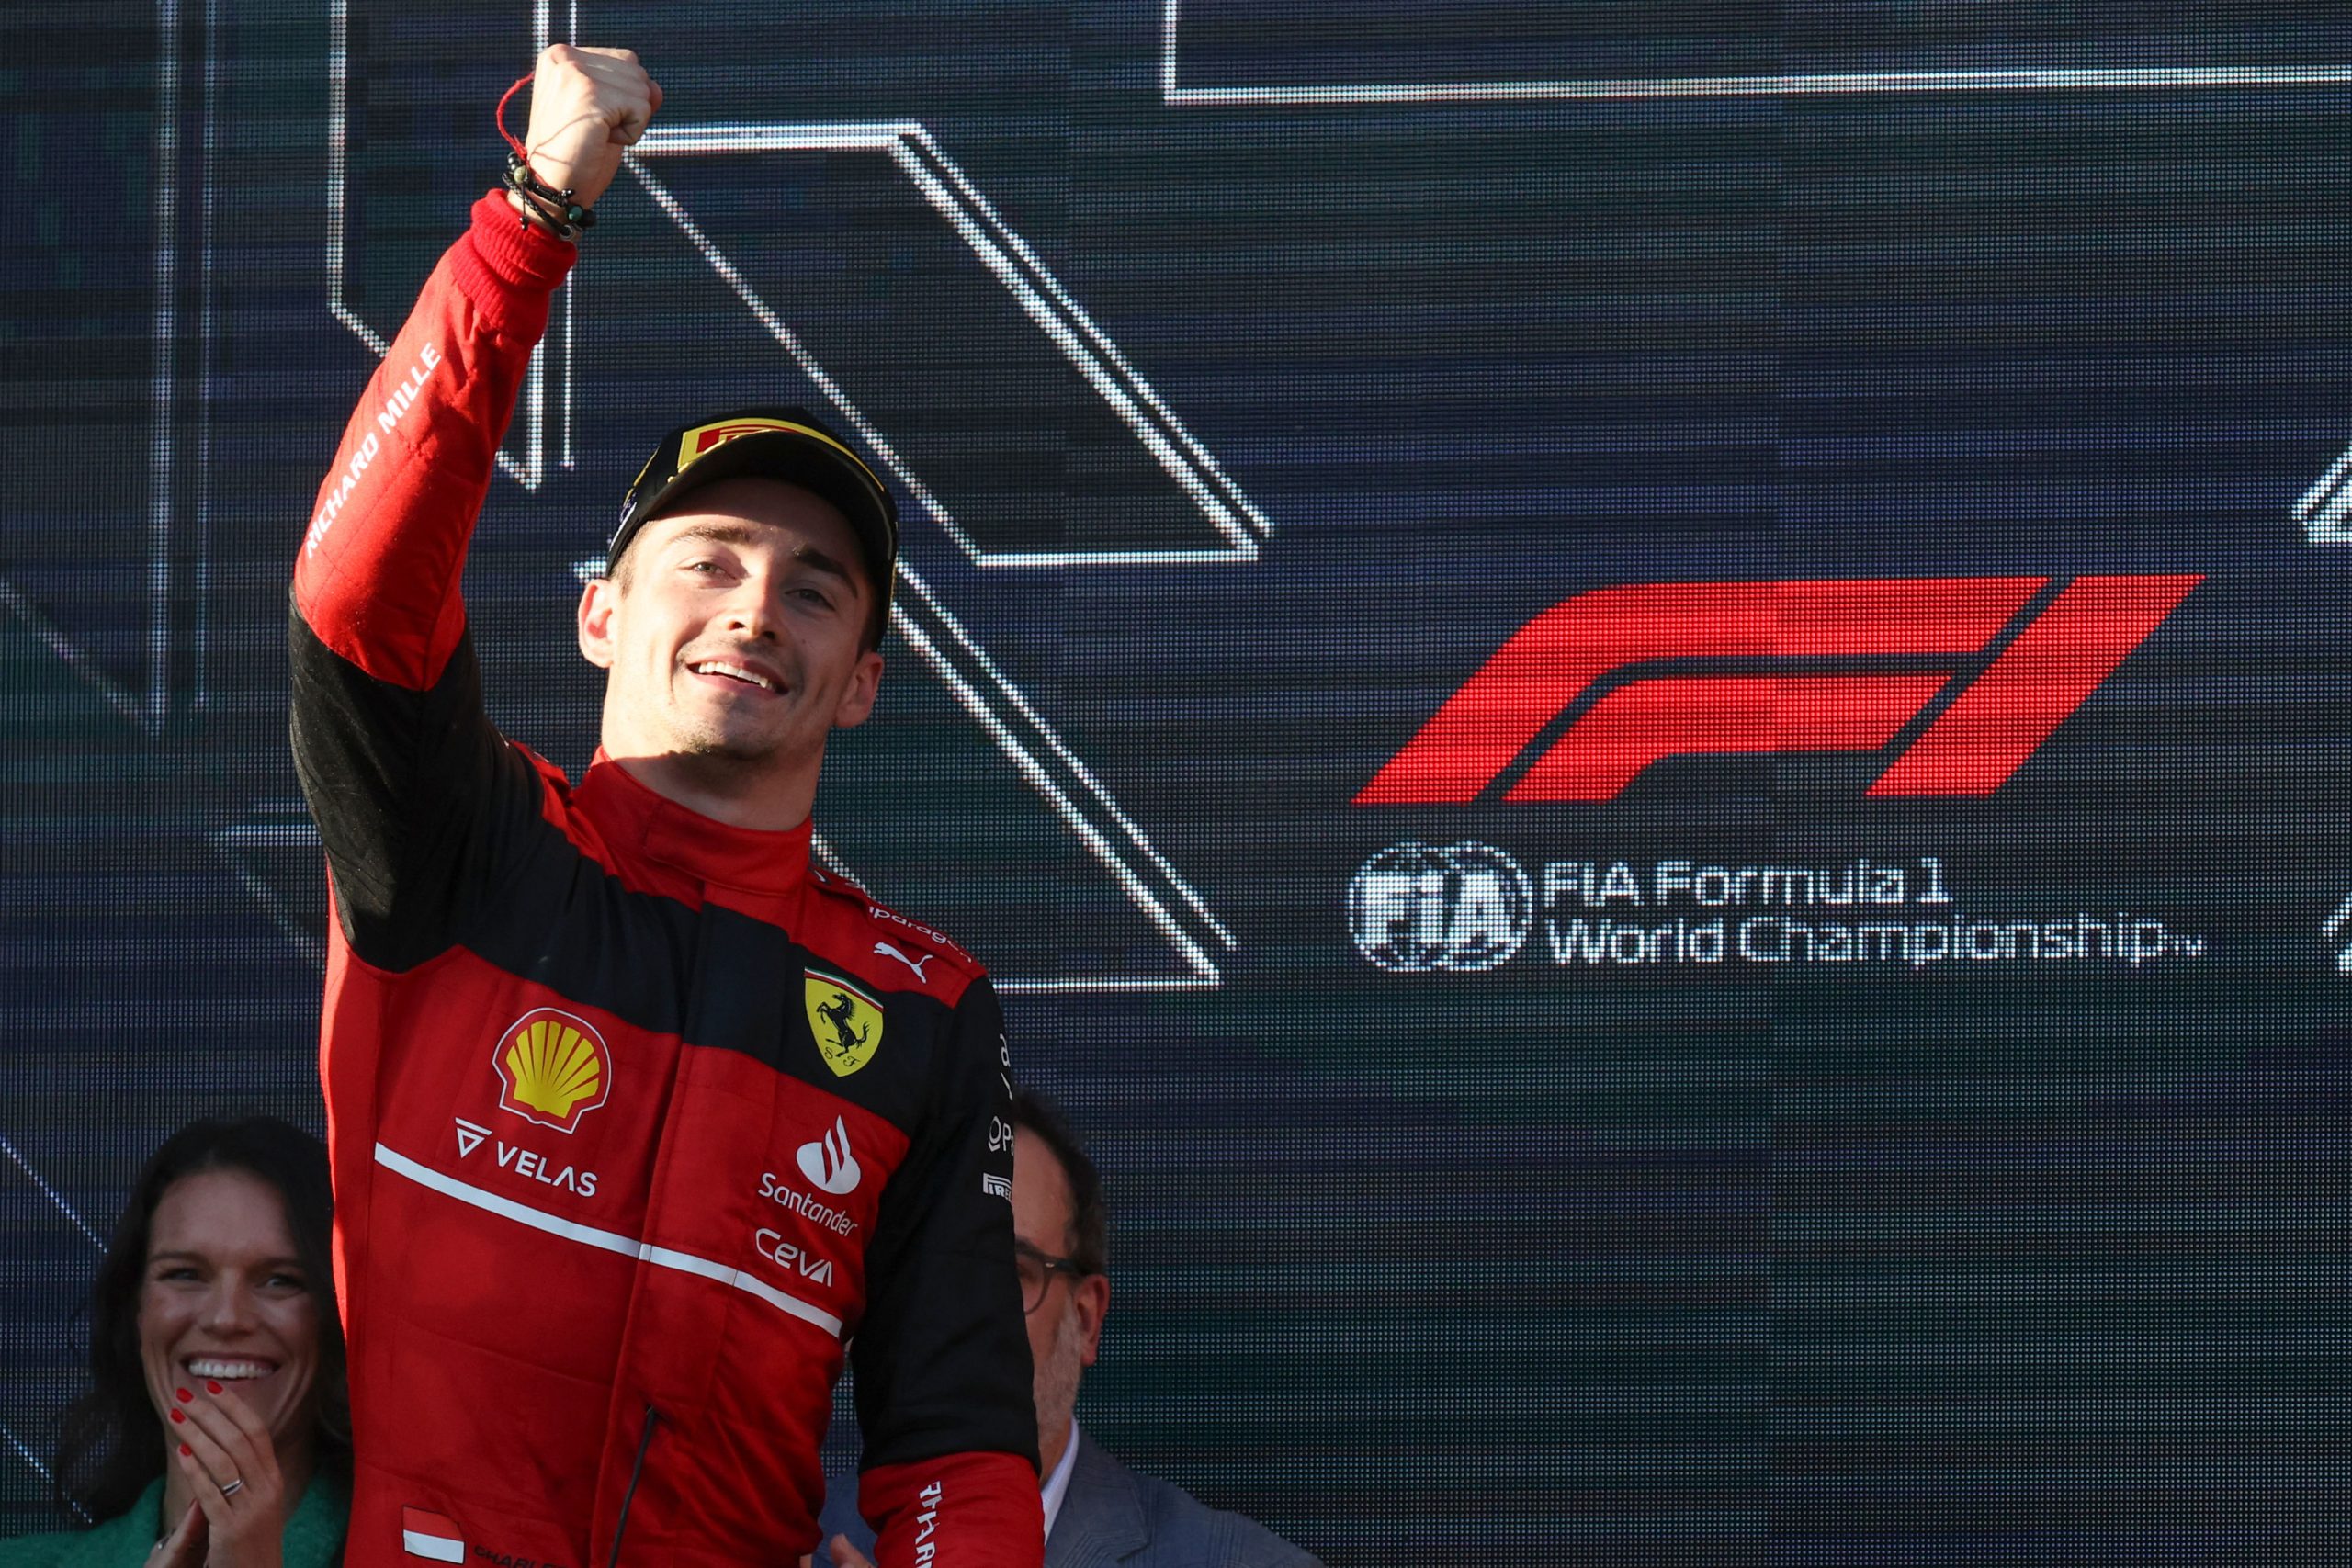 Australian Grand Prix: Charles Leclerc zooms into first place with Ferrari